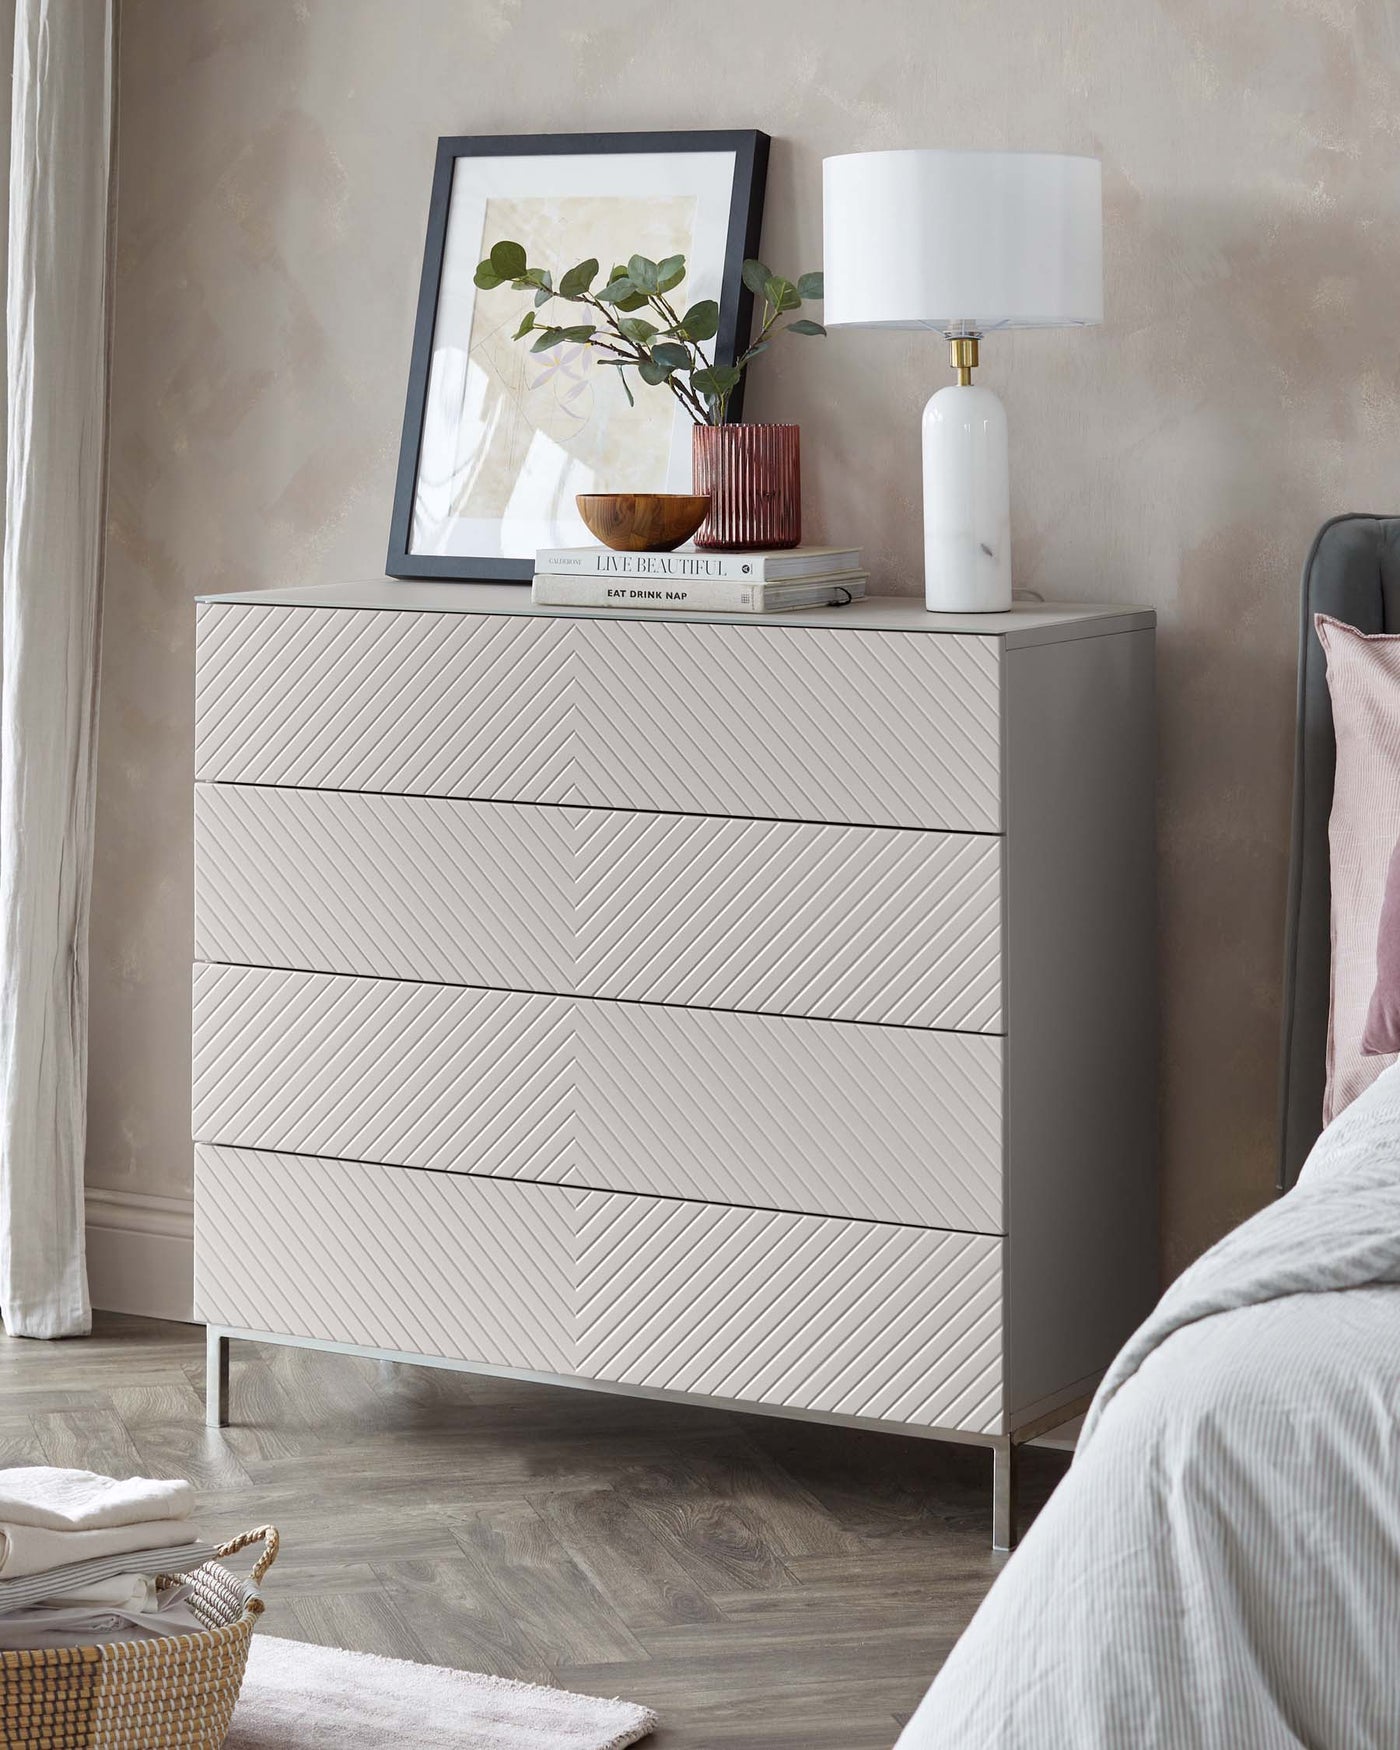 Modern light grey dresser with chevron patterned drawers and metal legs displayed in a bedroom setting with a lamp, framed artwork, and decorative items on top.